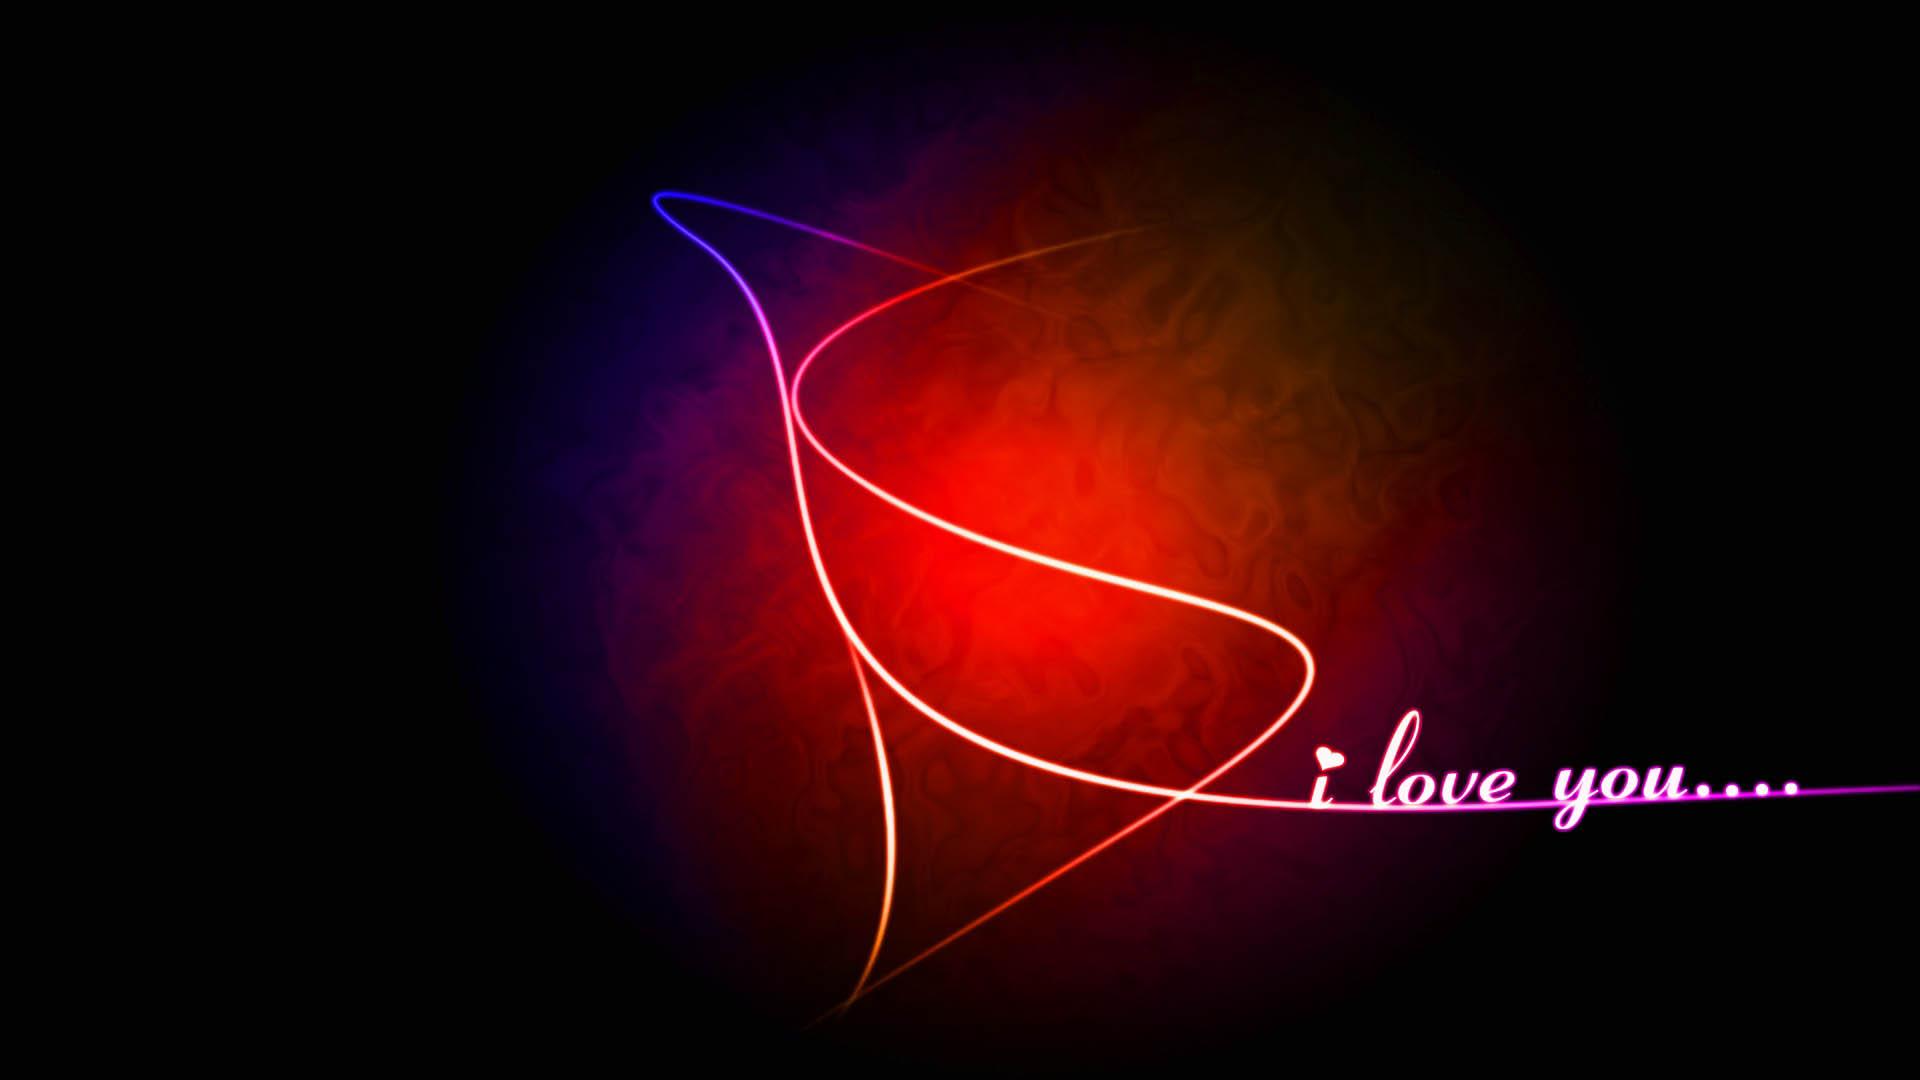 Love You Backgrounds 10227 Hd Wallpapers in Love   Imagescicom